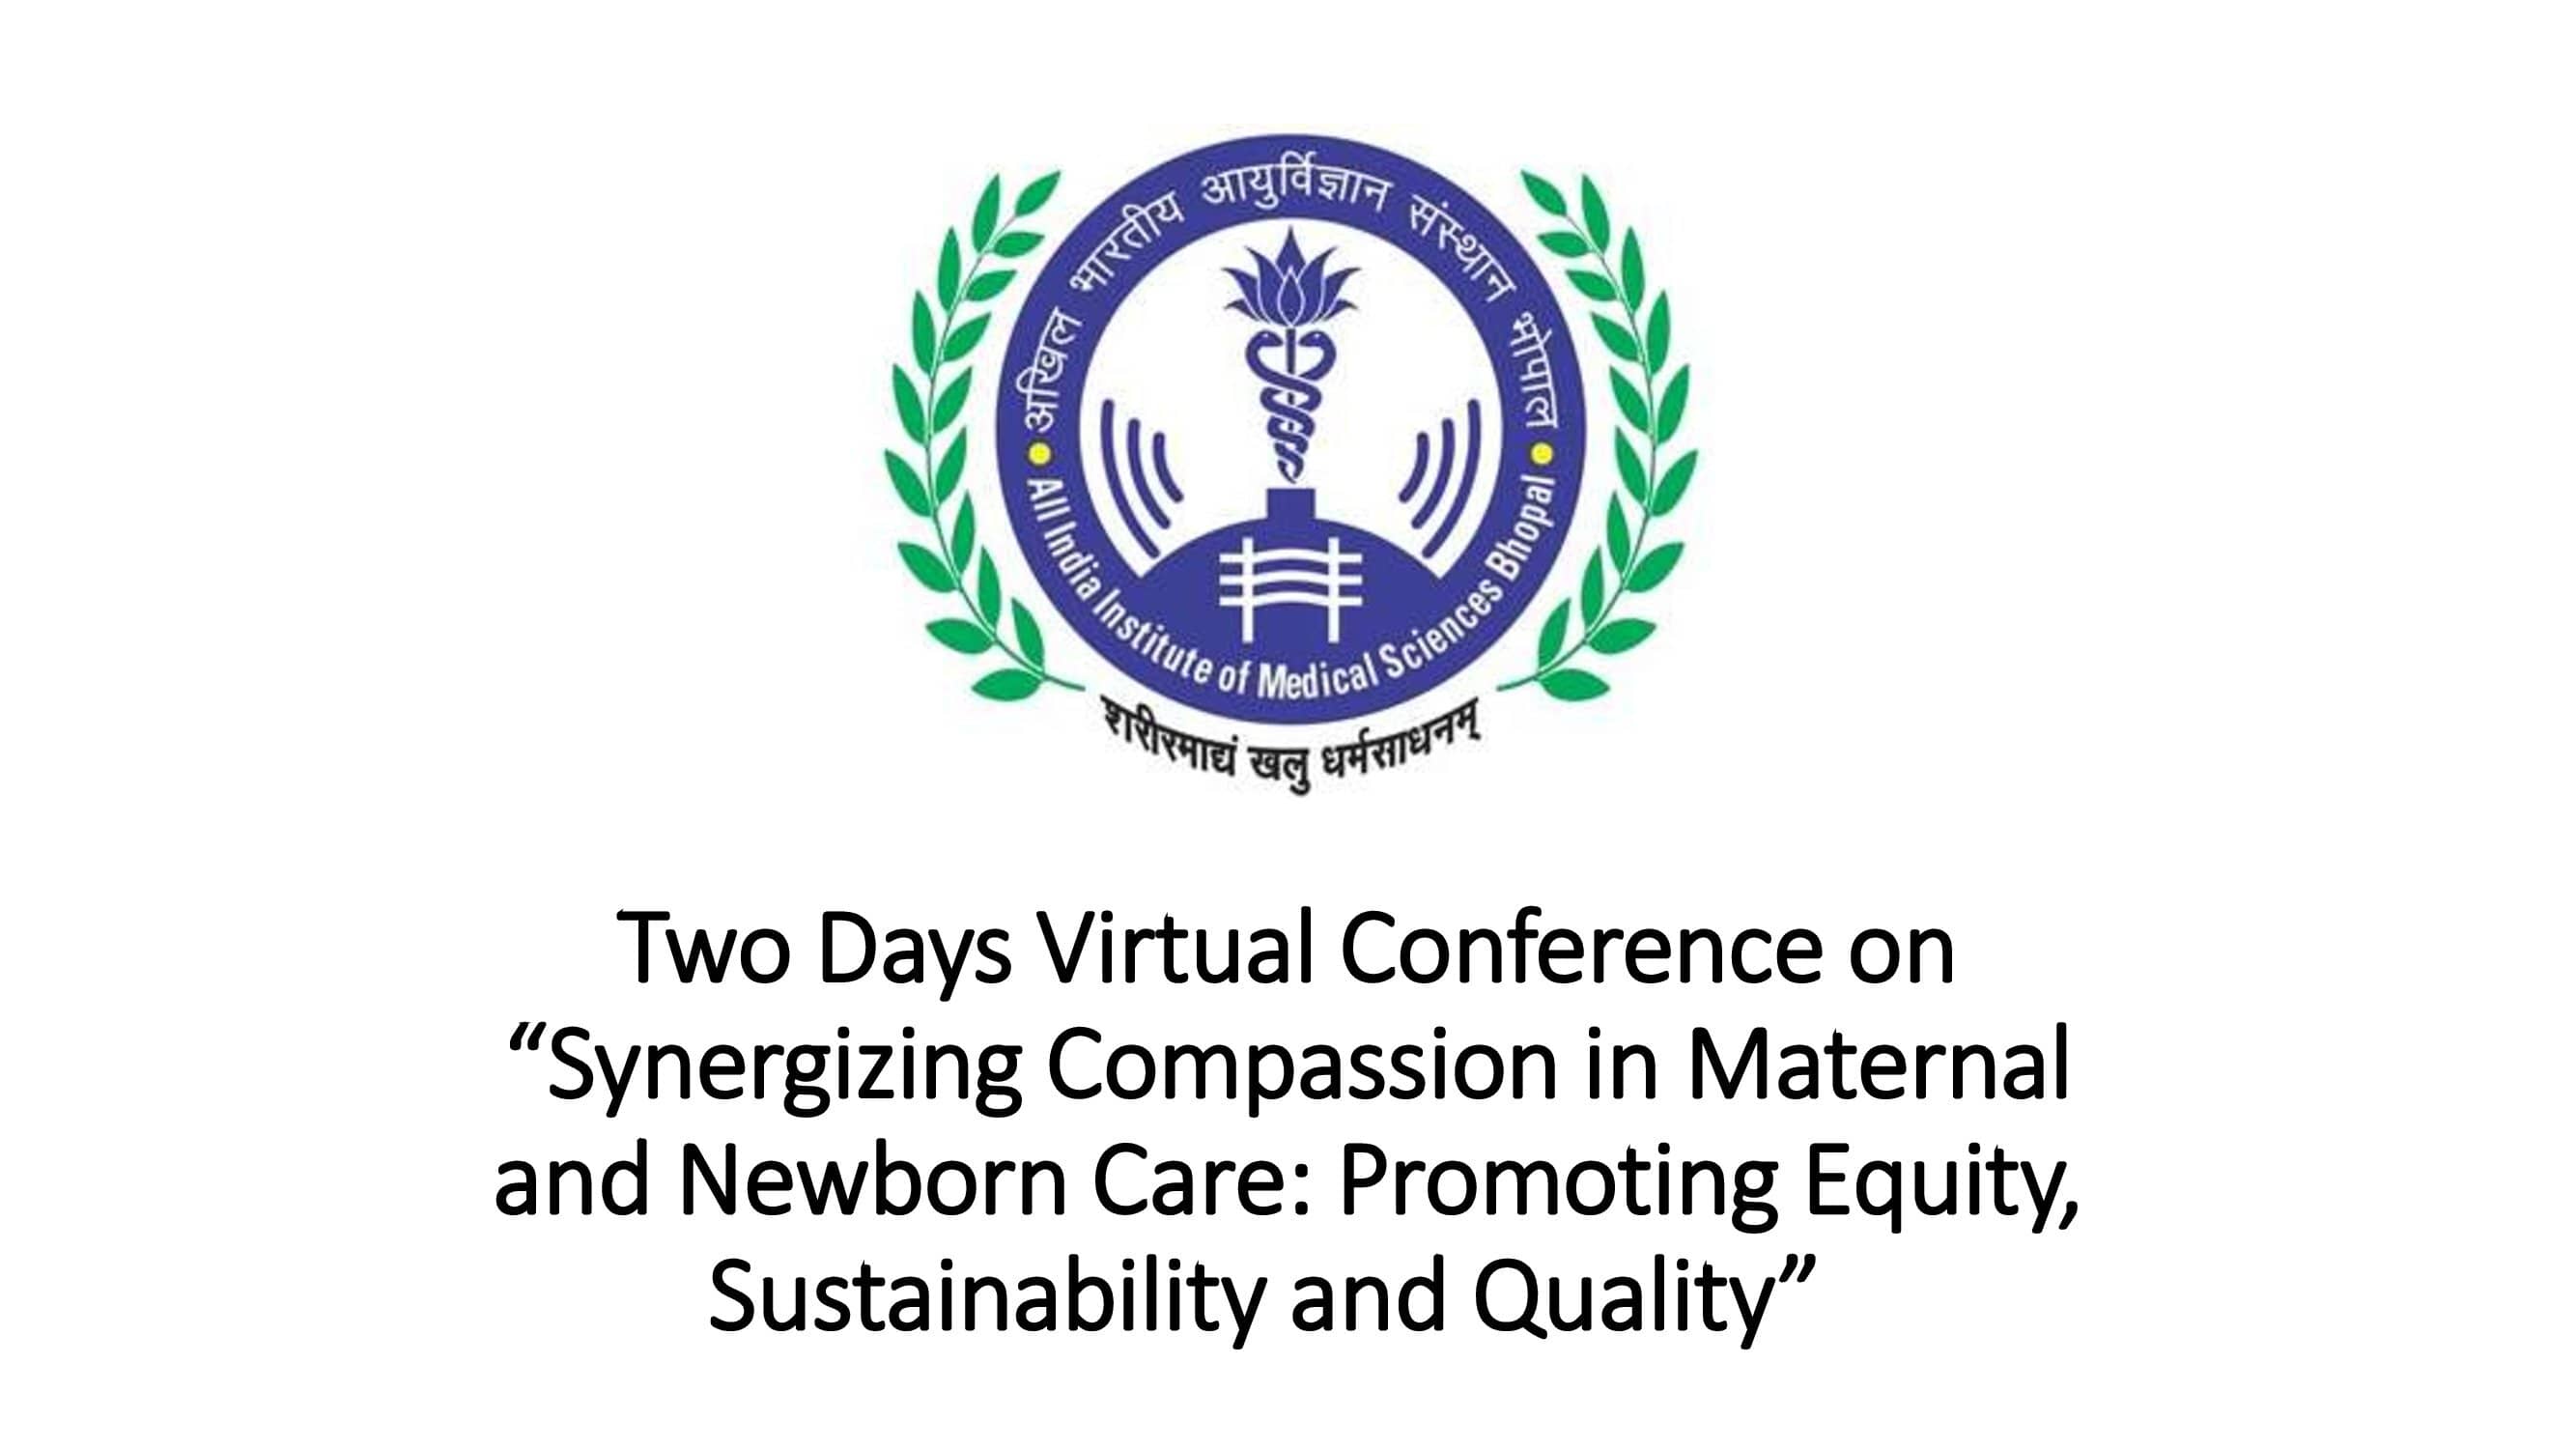 Two Days Virtual Conference on “Synergizing Compassion in Maternal and Newborn Care: Promoting Equity, Sustainability and Quality”